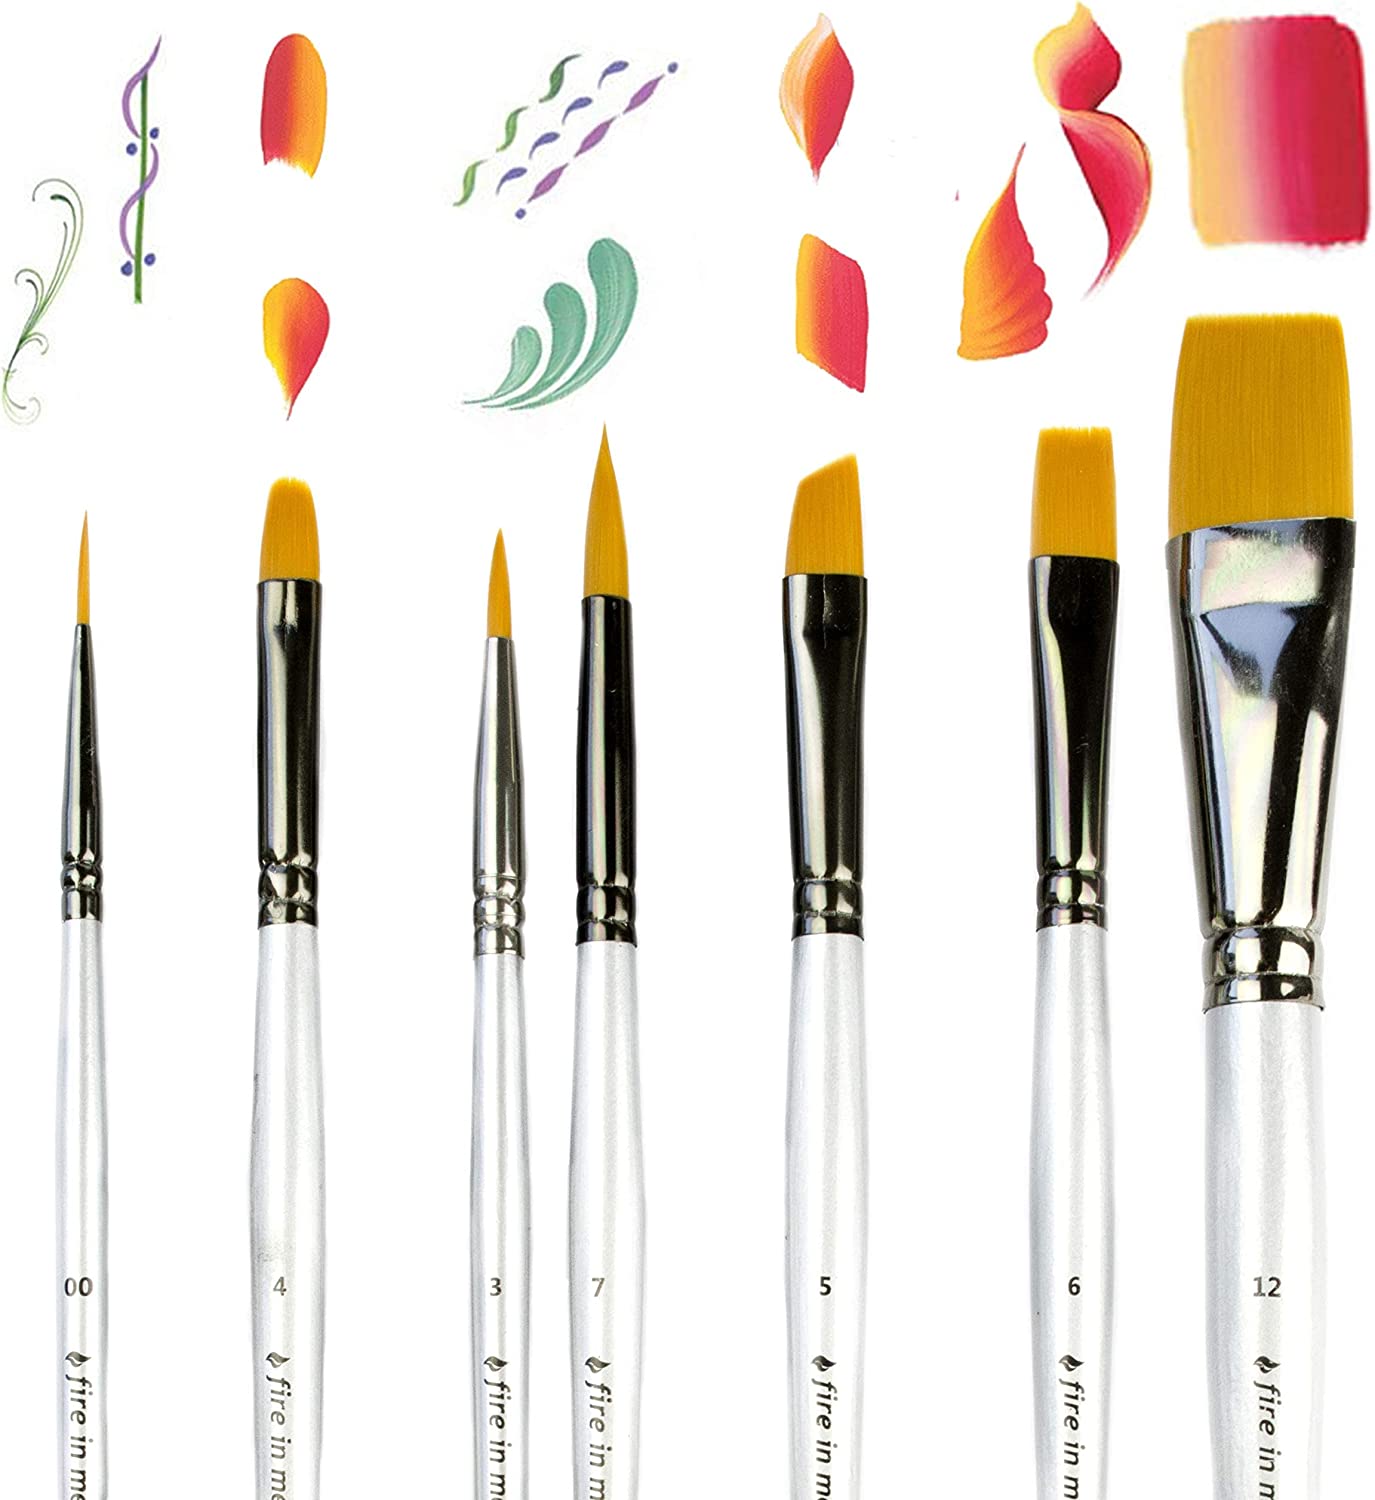 Qionew Micro Detail Paint Brush Set, 15pcs Miniature Painting Brushes for  Fine Detailing & Art Painting -Craft Models, Rock Painting, Watercolor Oil